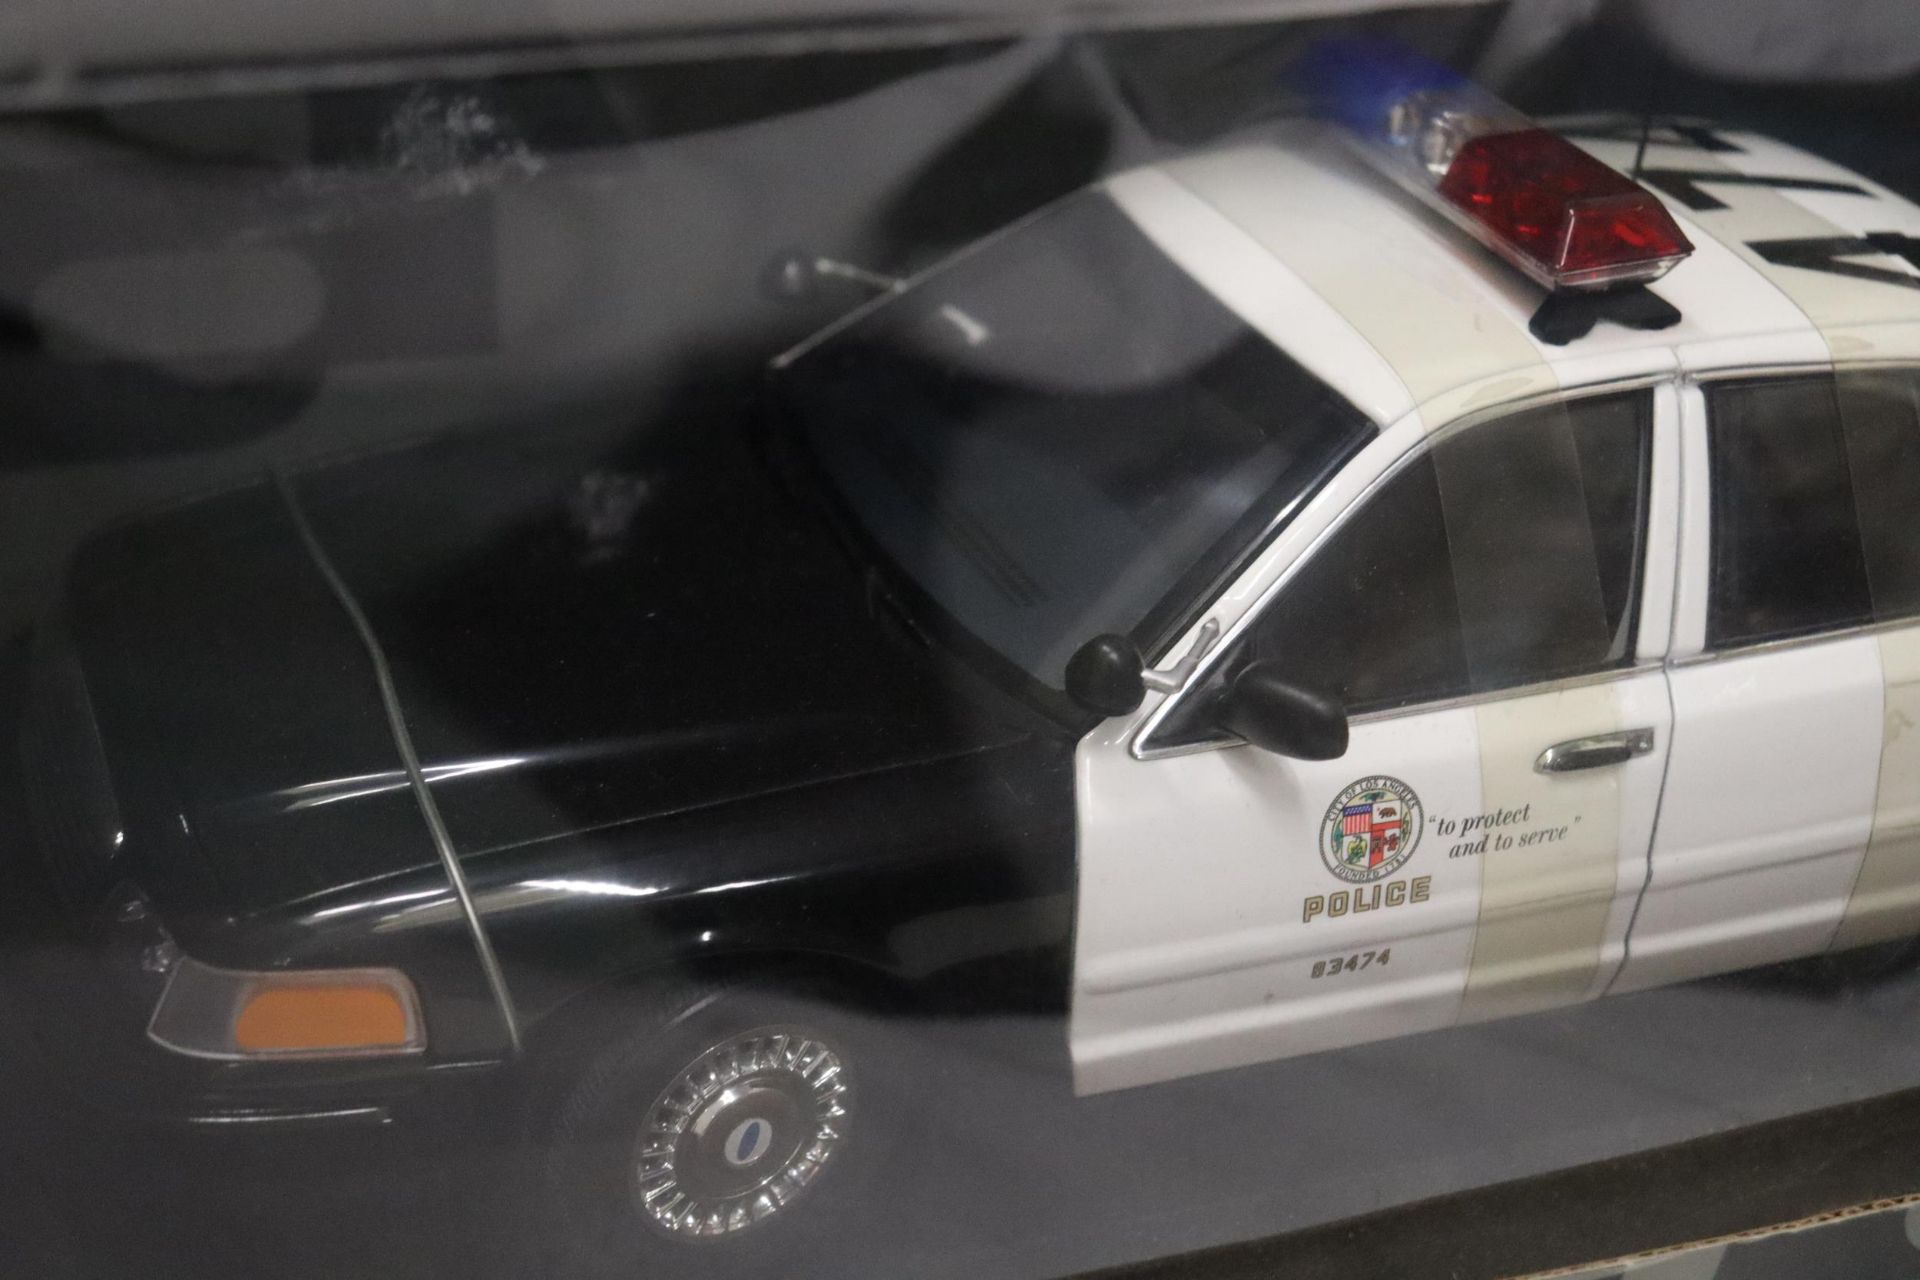 AN AUTO ART, POLICE DIVISION CAR, SCALE 1:18, AS NEW IN BOX - Image 7 of 7